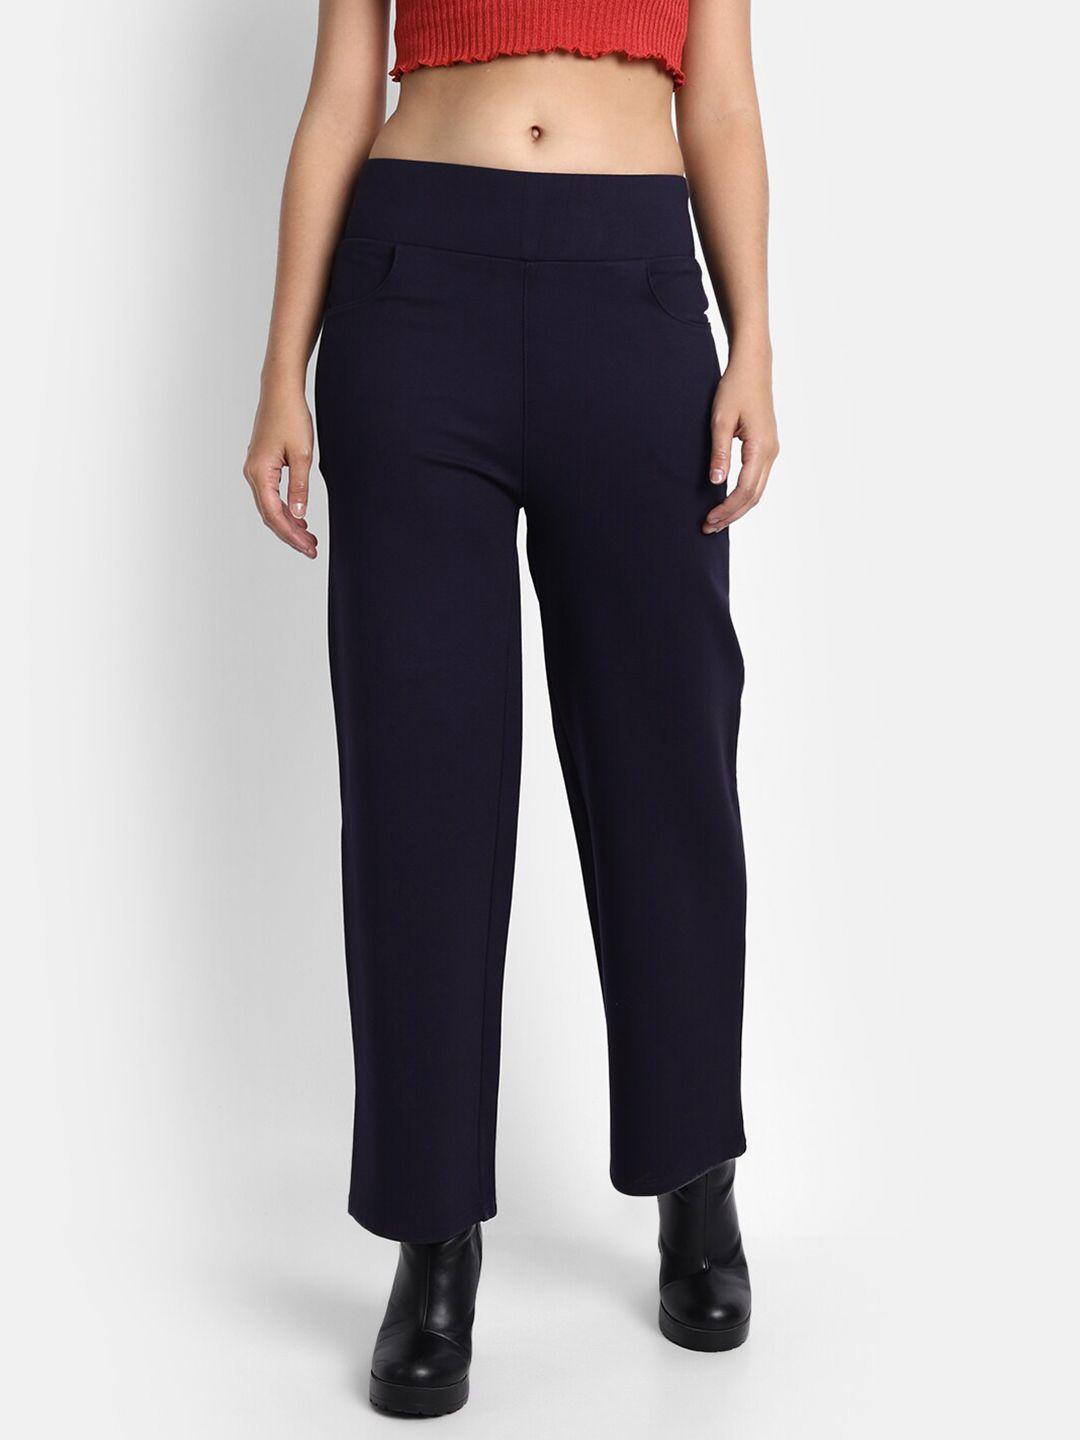 next-one-women-navy-blue-solid-high-rise-jeggings